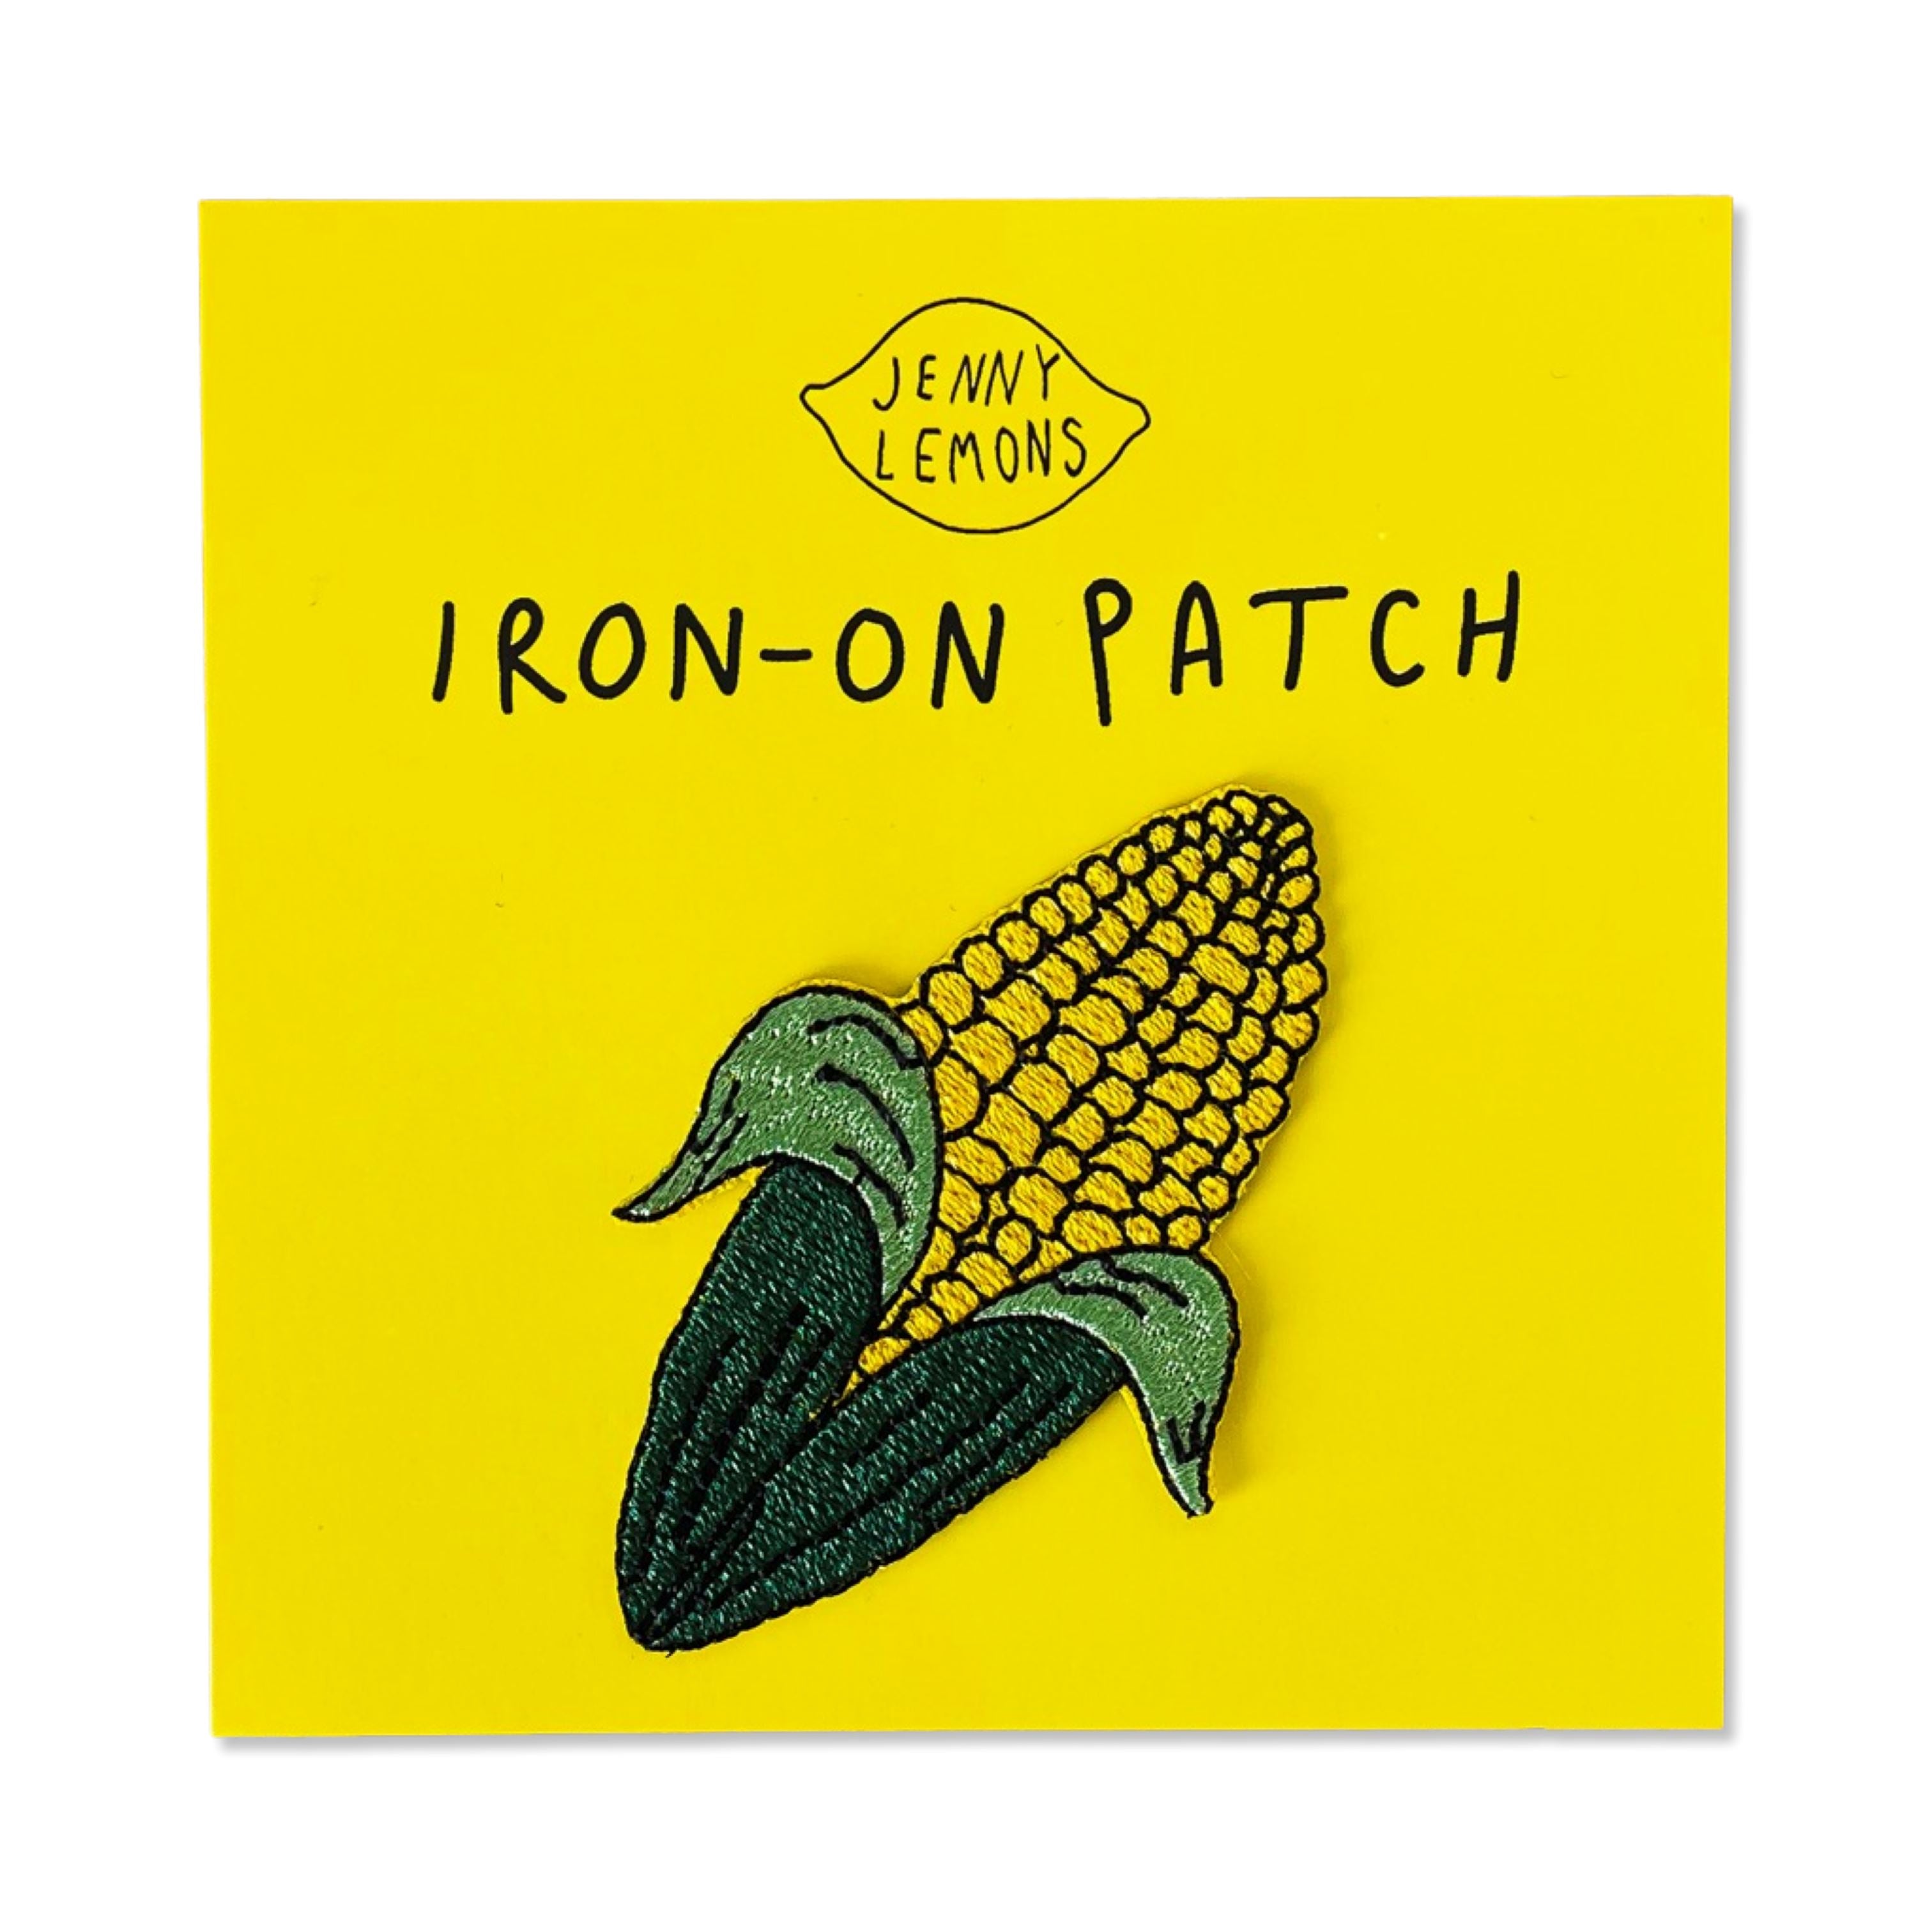 Sew-on patch attachment